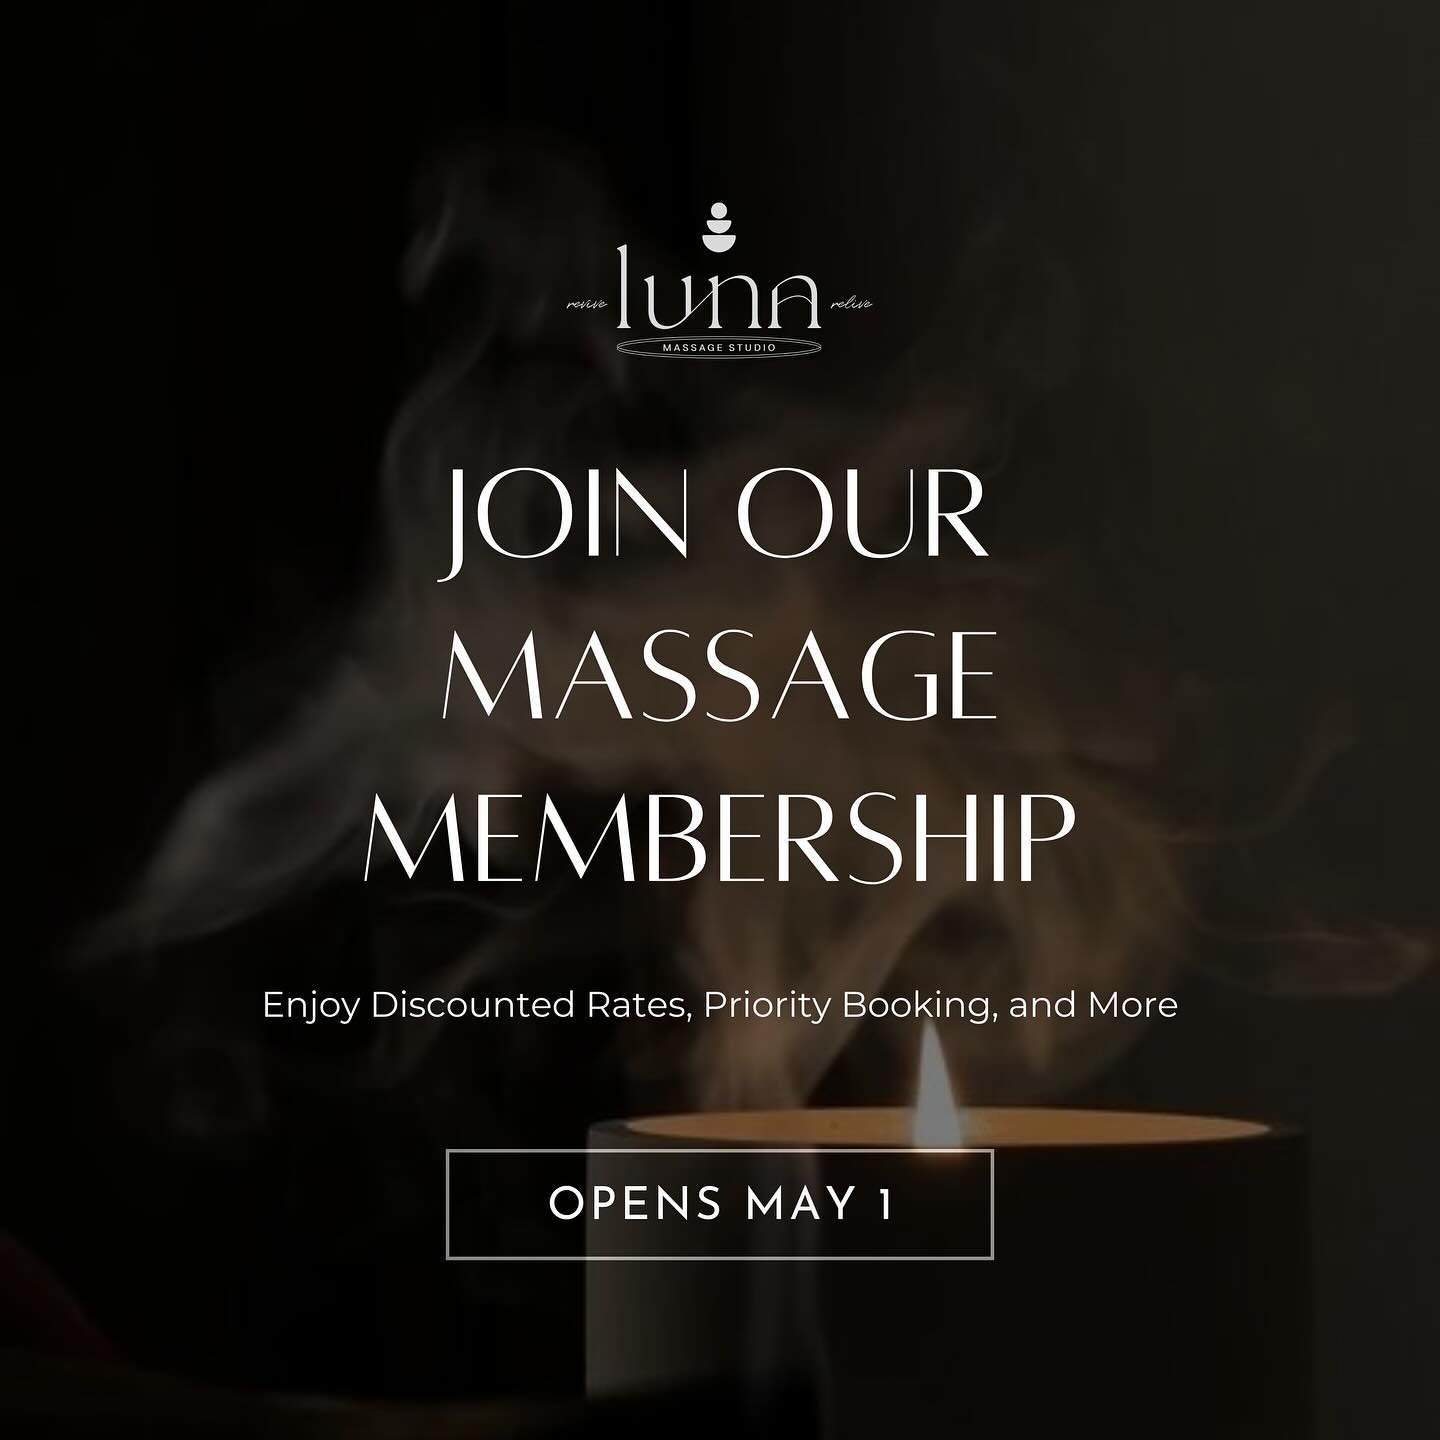 Massage membership enrollment begins this Wednesday, May 1! 

Why join a massage membership? It means more massages, more perks, more relaxation, less money, and less hassle. 

DM for more information ✨